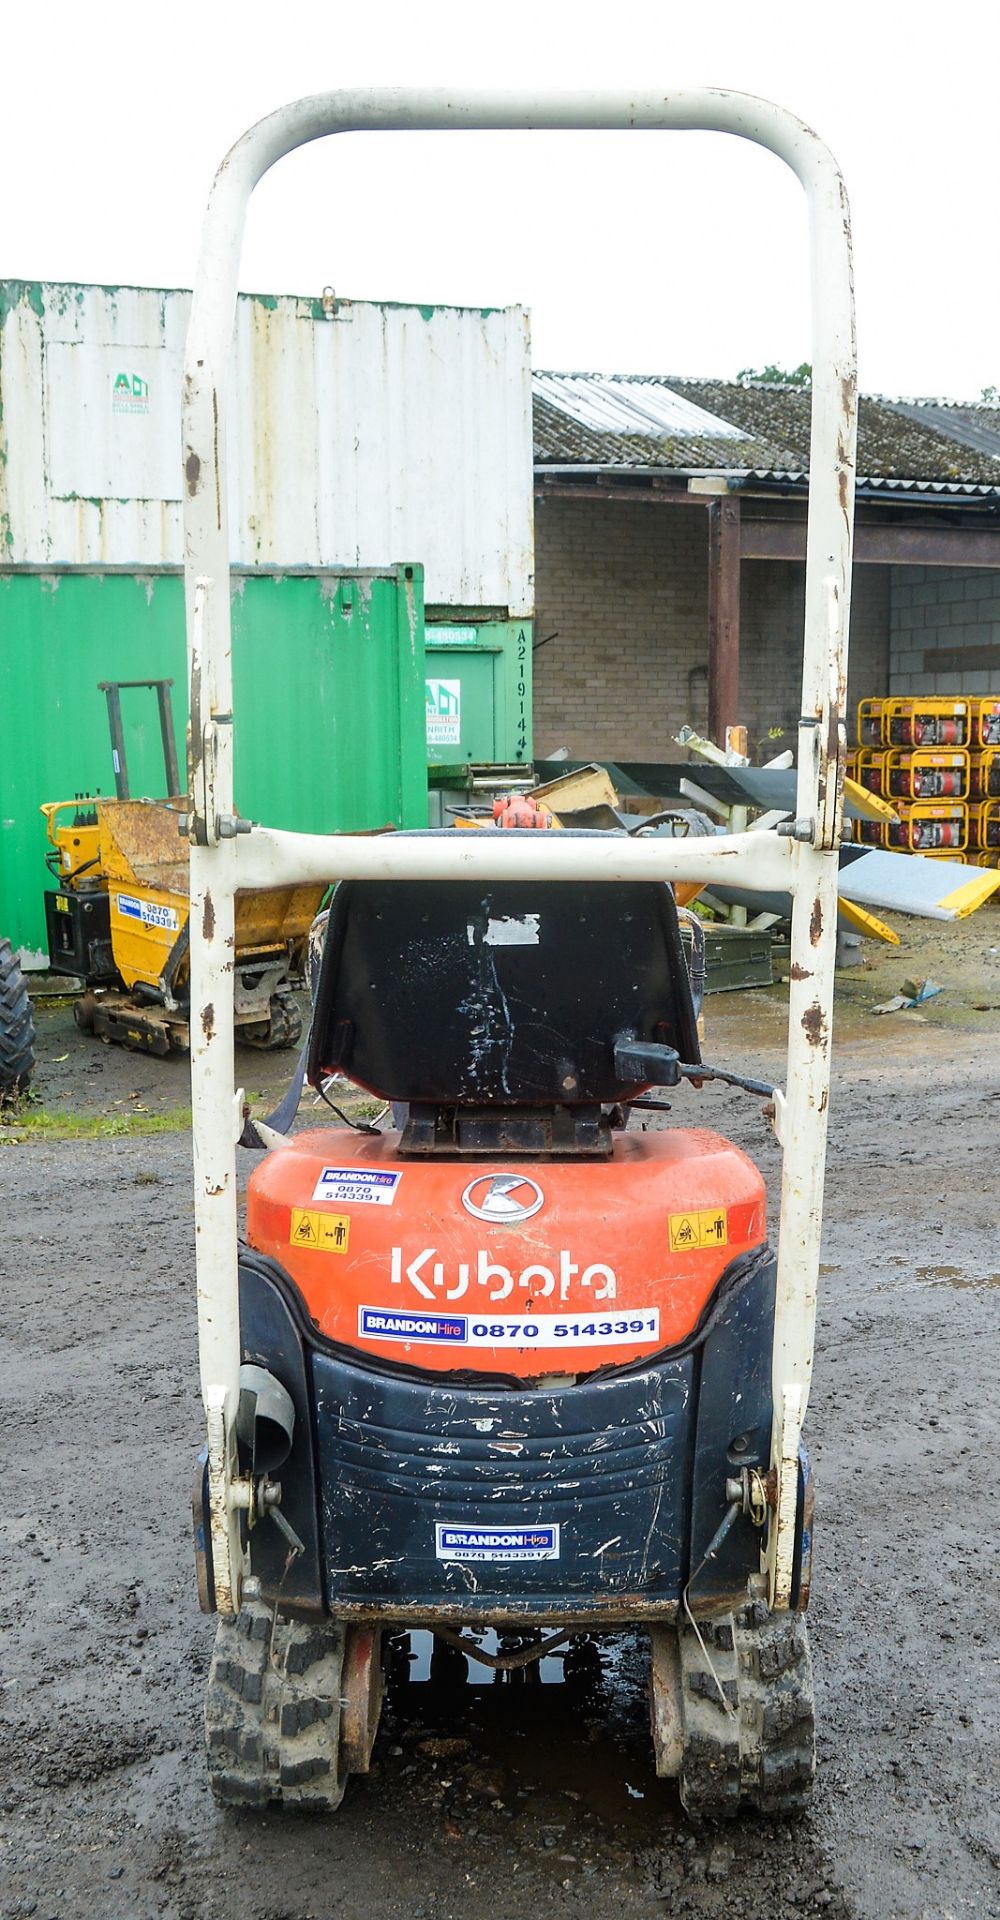 Kubota KX008-3 850 kg rubber tracked micro excavator Year: 2004 S/N: 12445 Recorded Hours: 4414 - Image 6 of 10